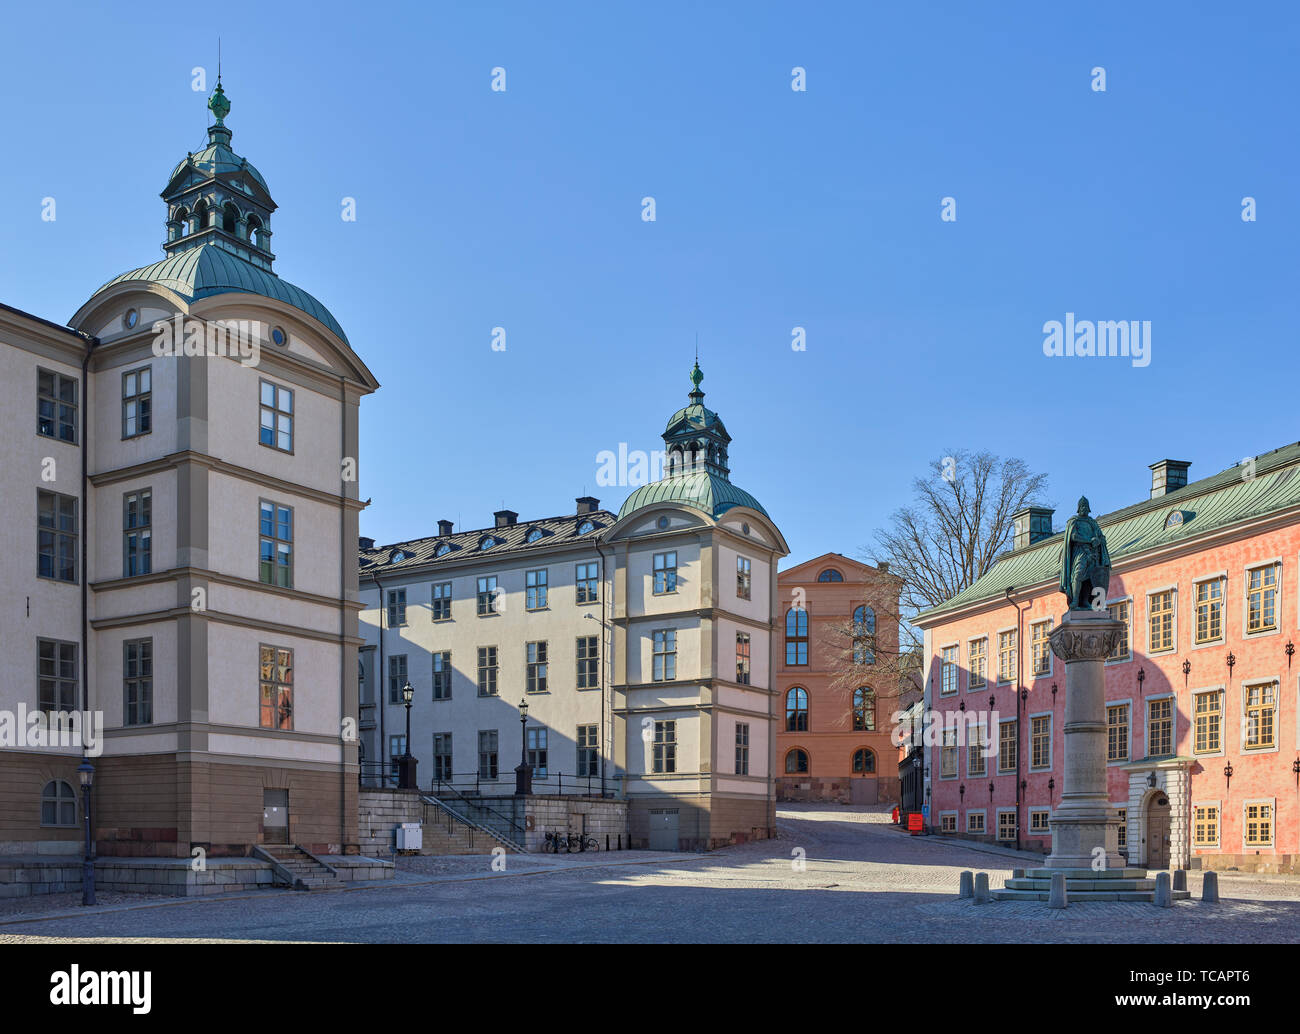 Skorsten High Resolution Stock Photography and Images - Alamy